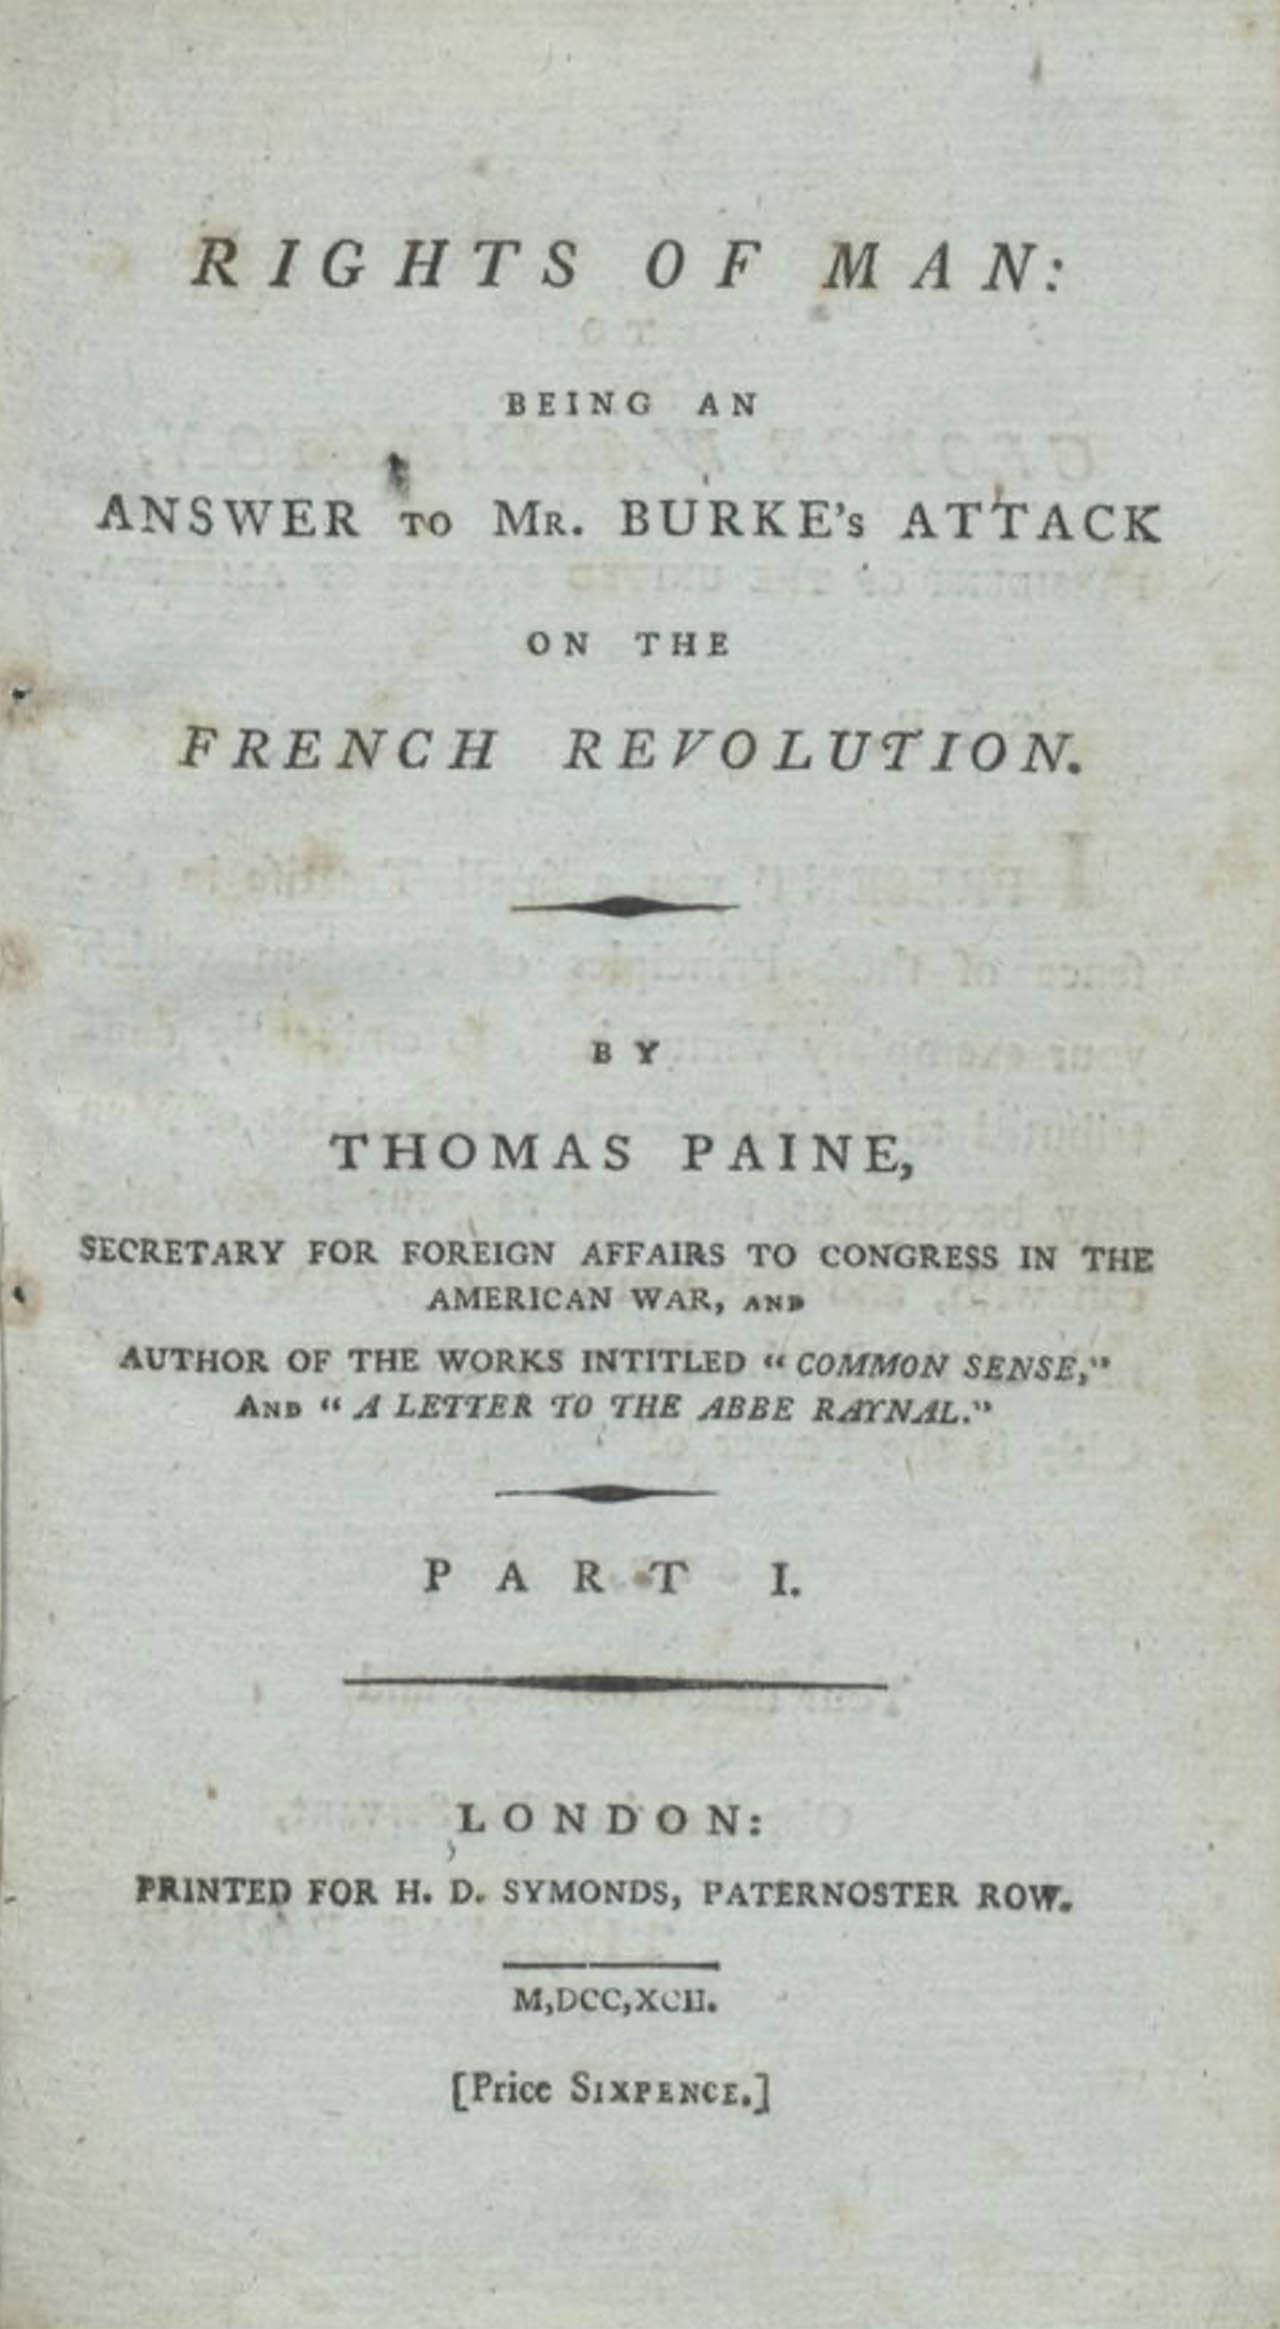 Title page of the Rights of Man